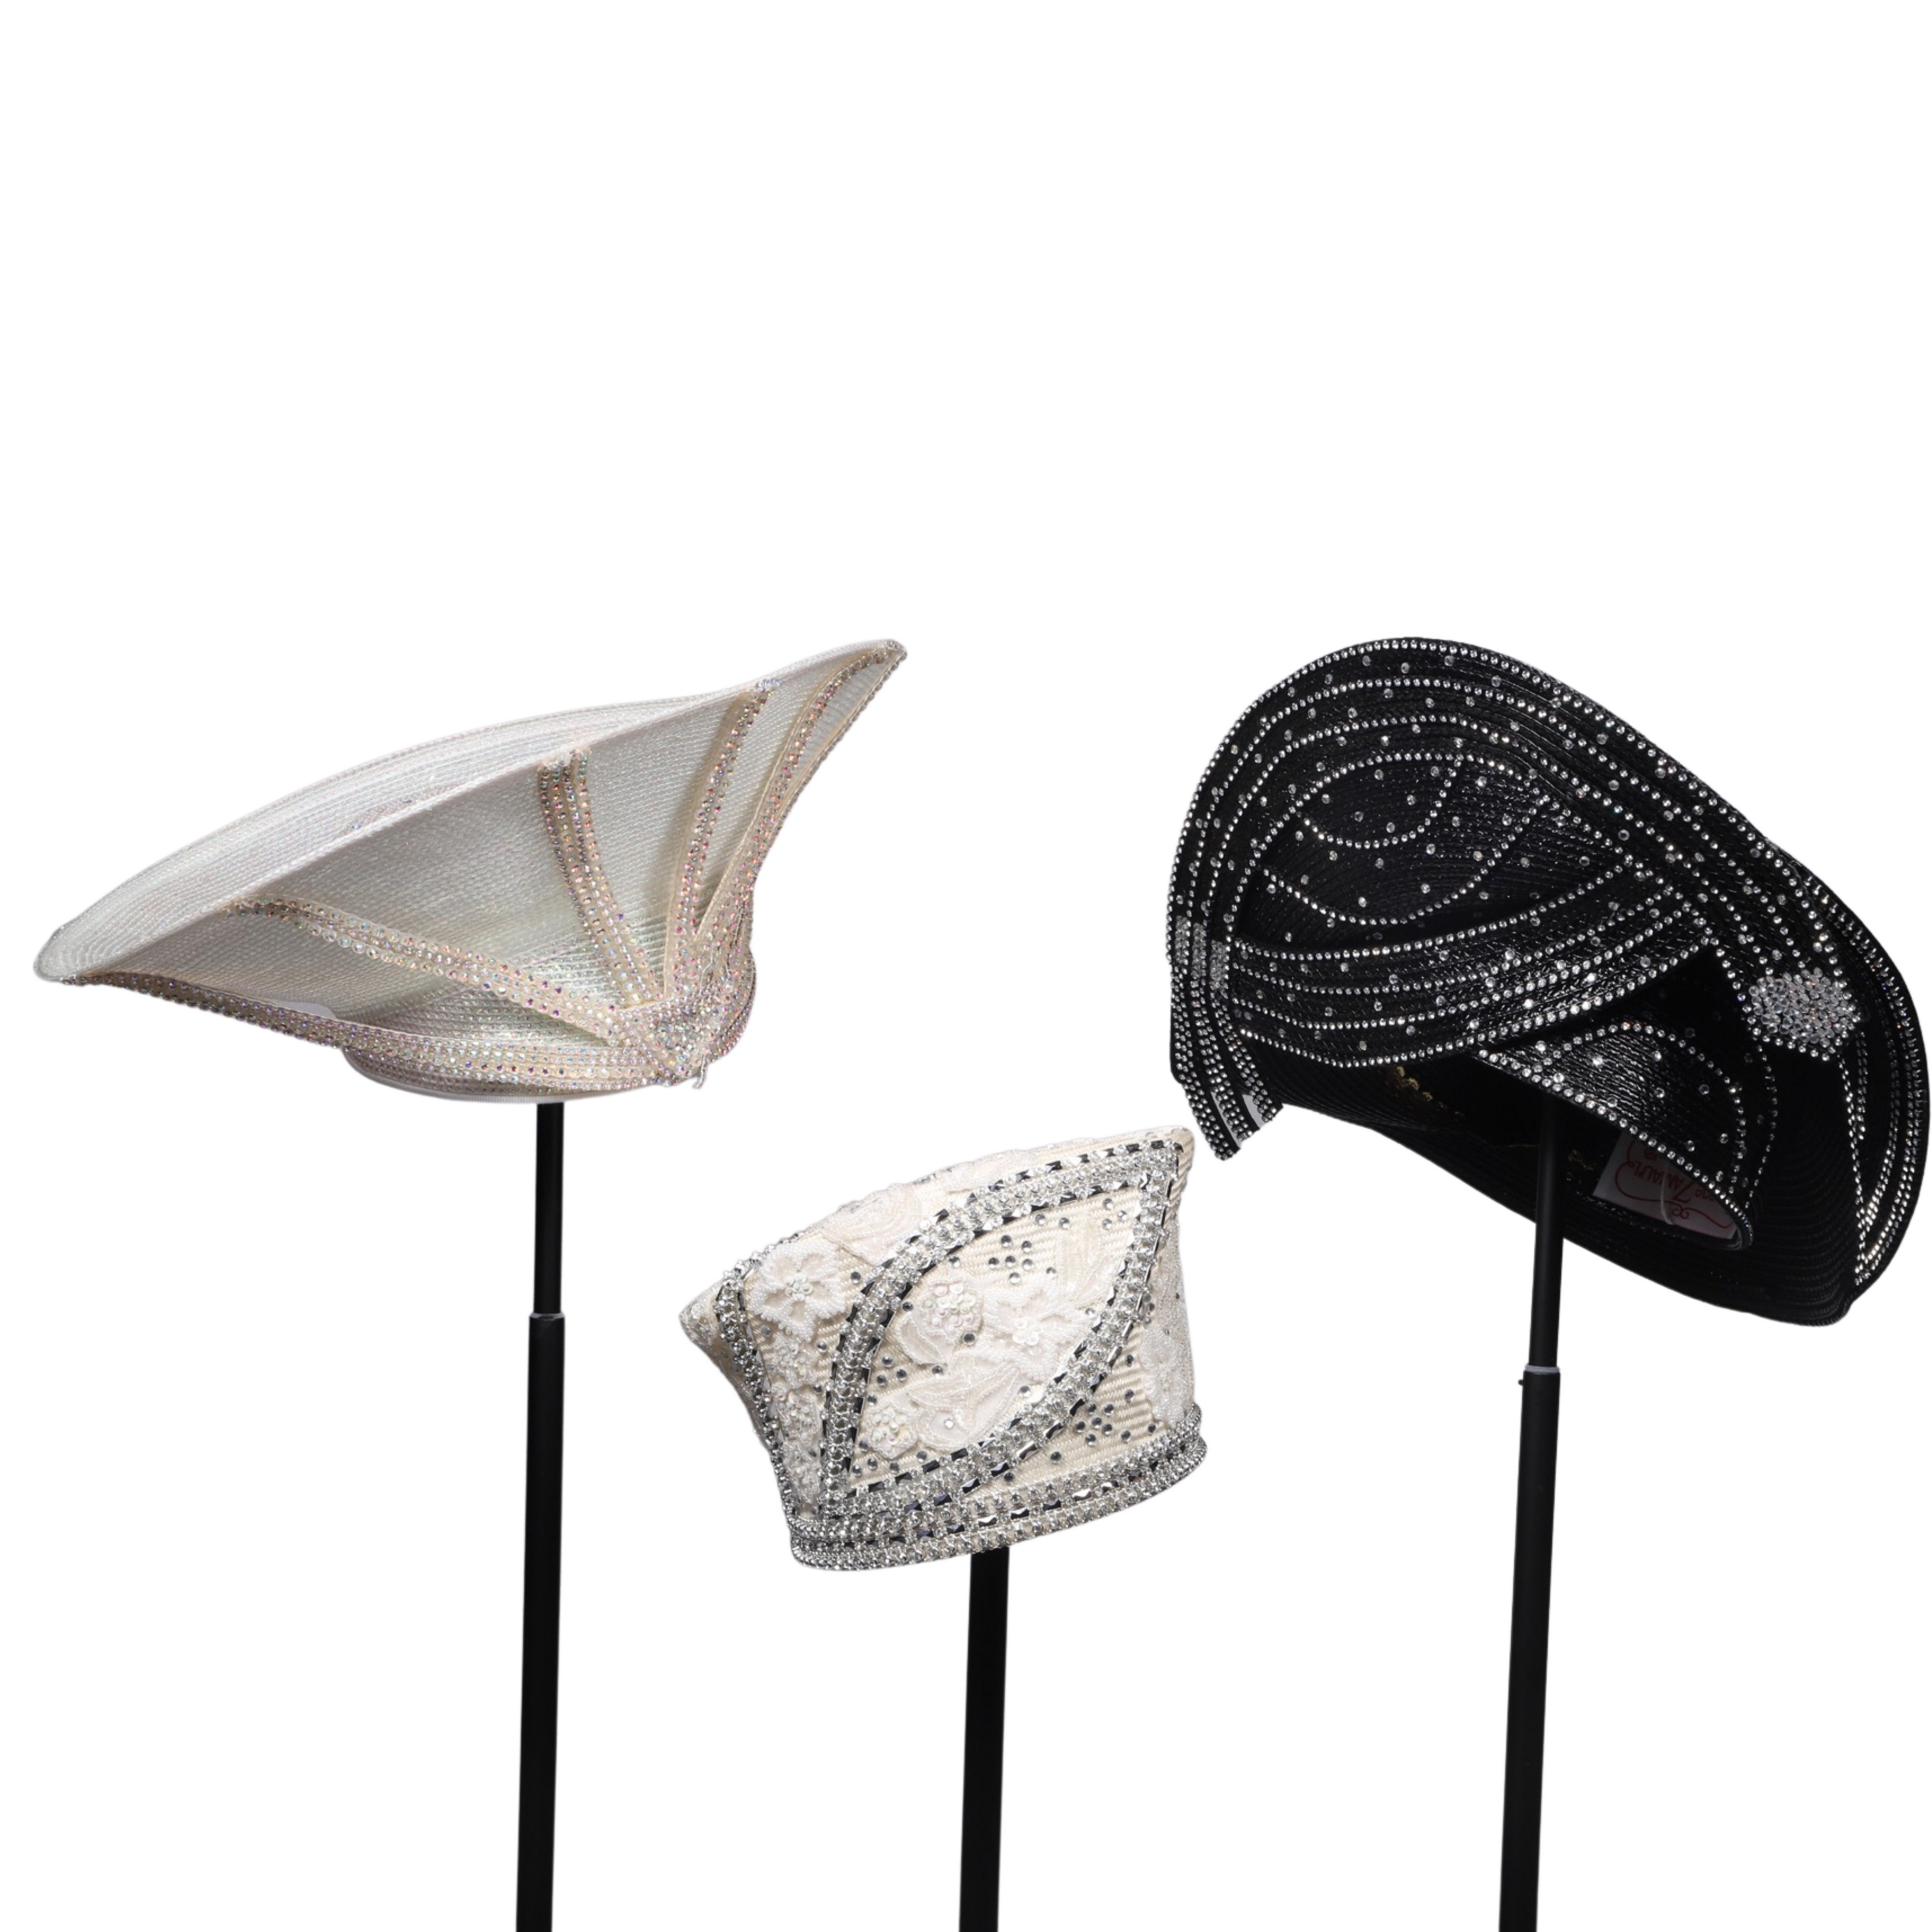  3 Designer hats to include George 3b4941